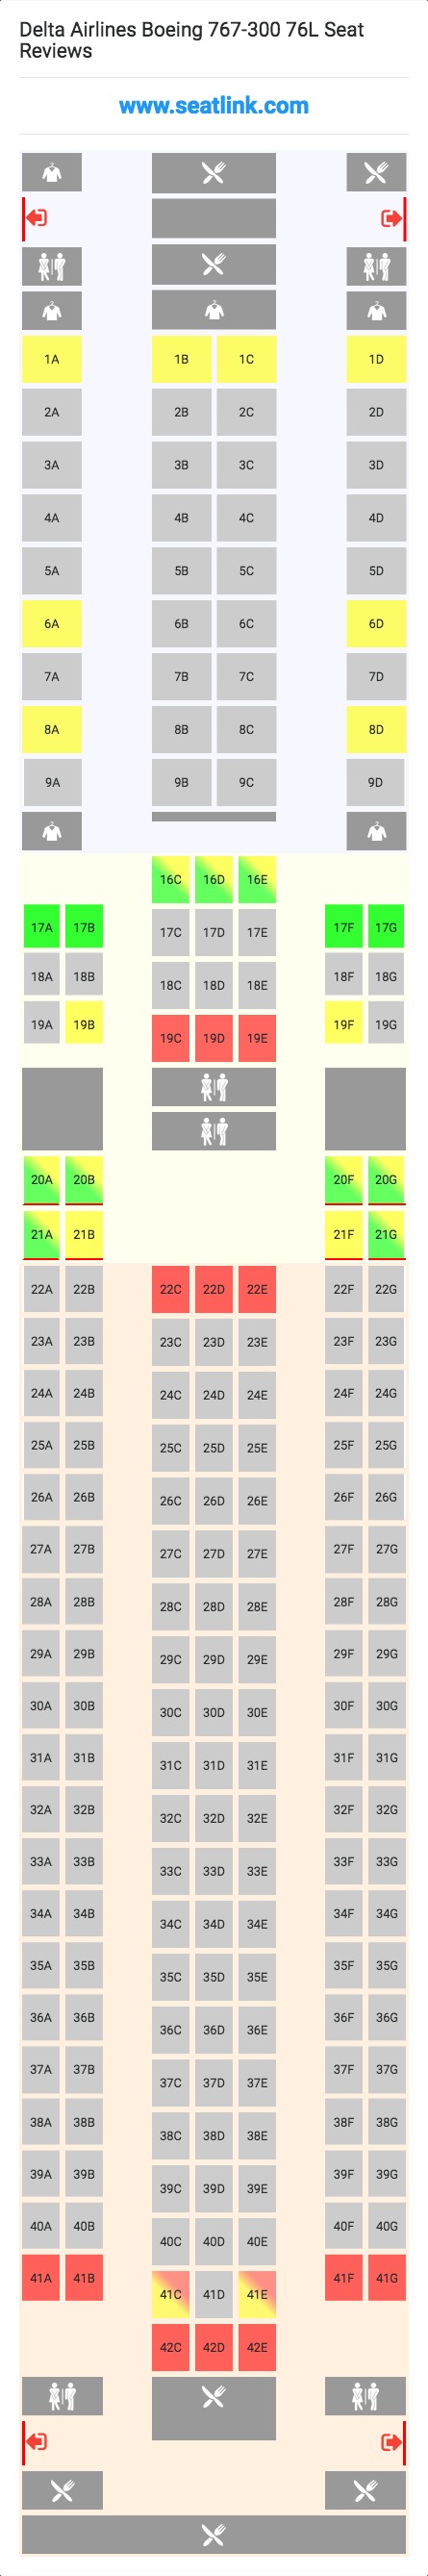 767 300 Delta Seating Chart